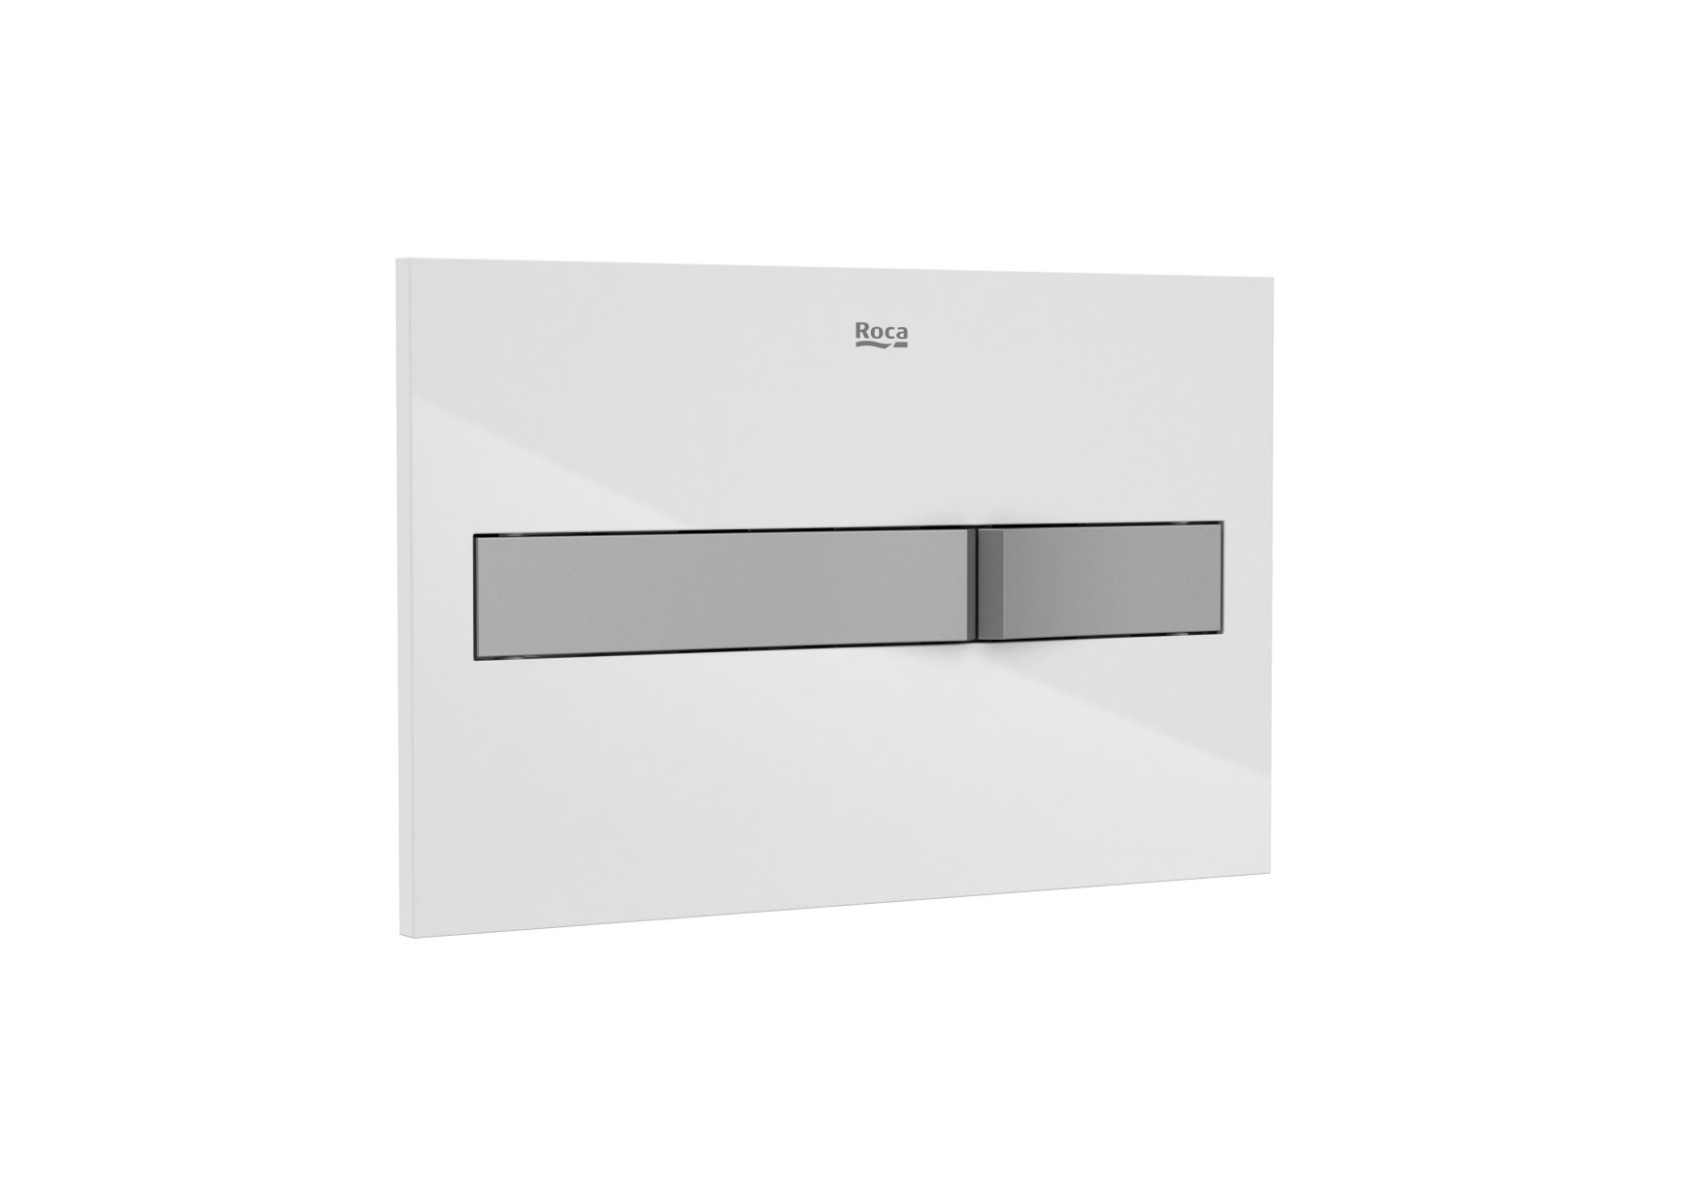 PL2 DUAL - Dual flush operating plate for concealed cistern white/grey